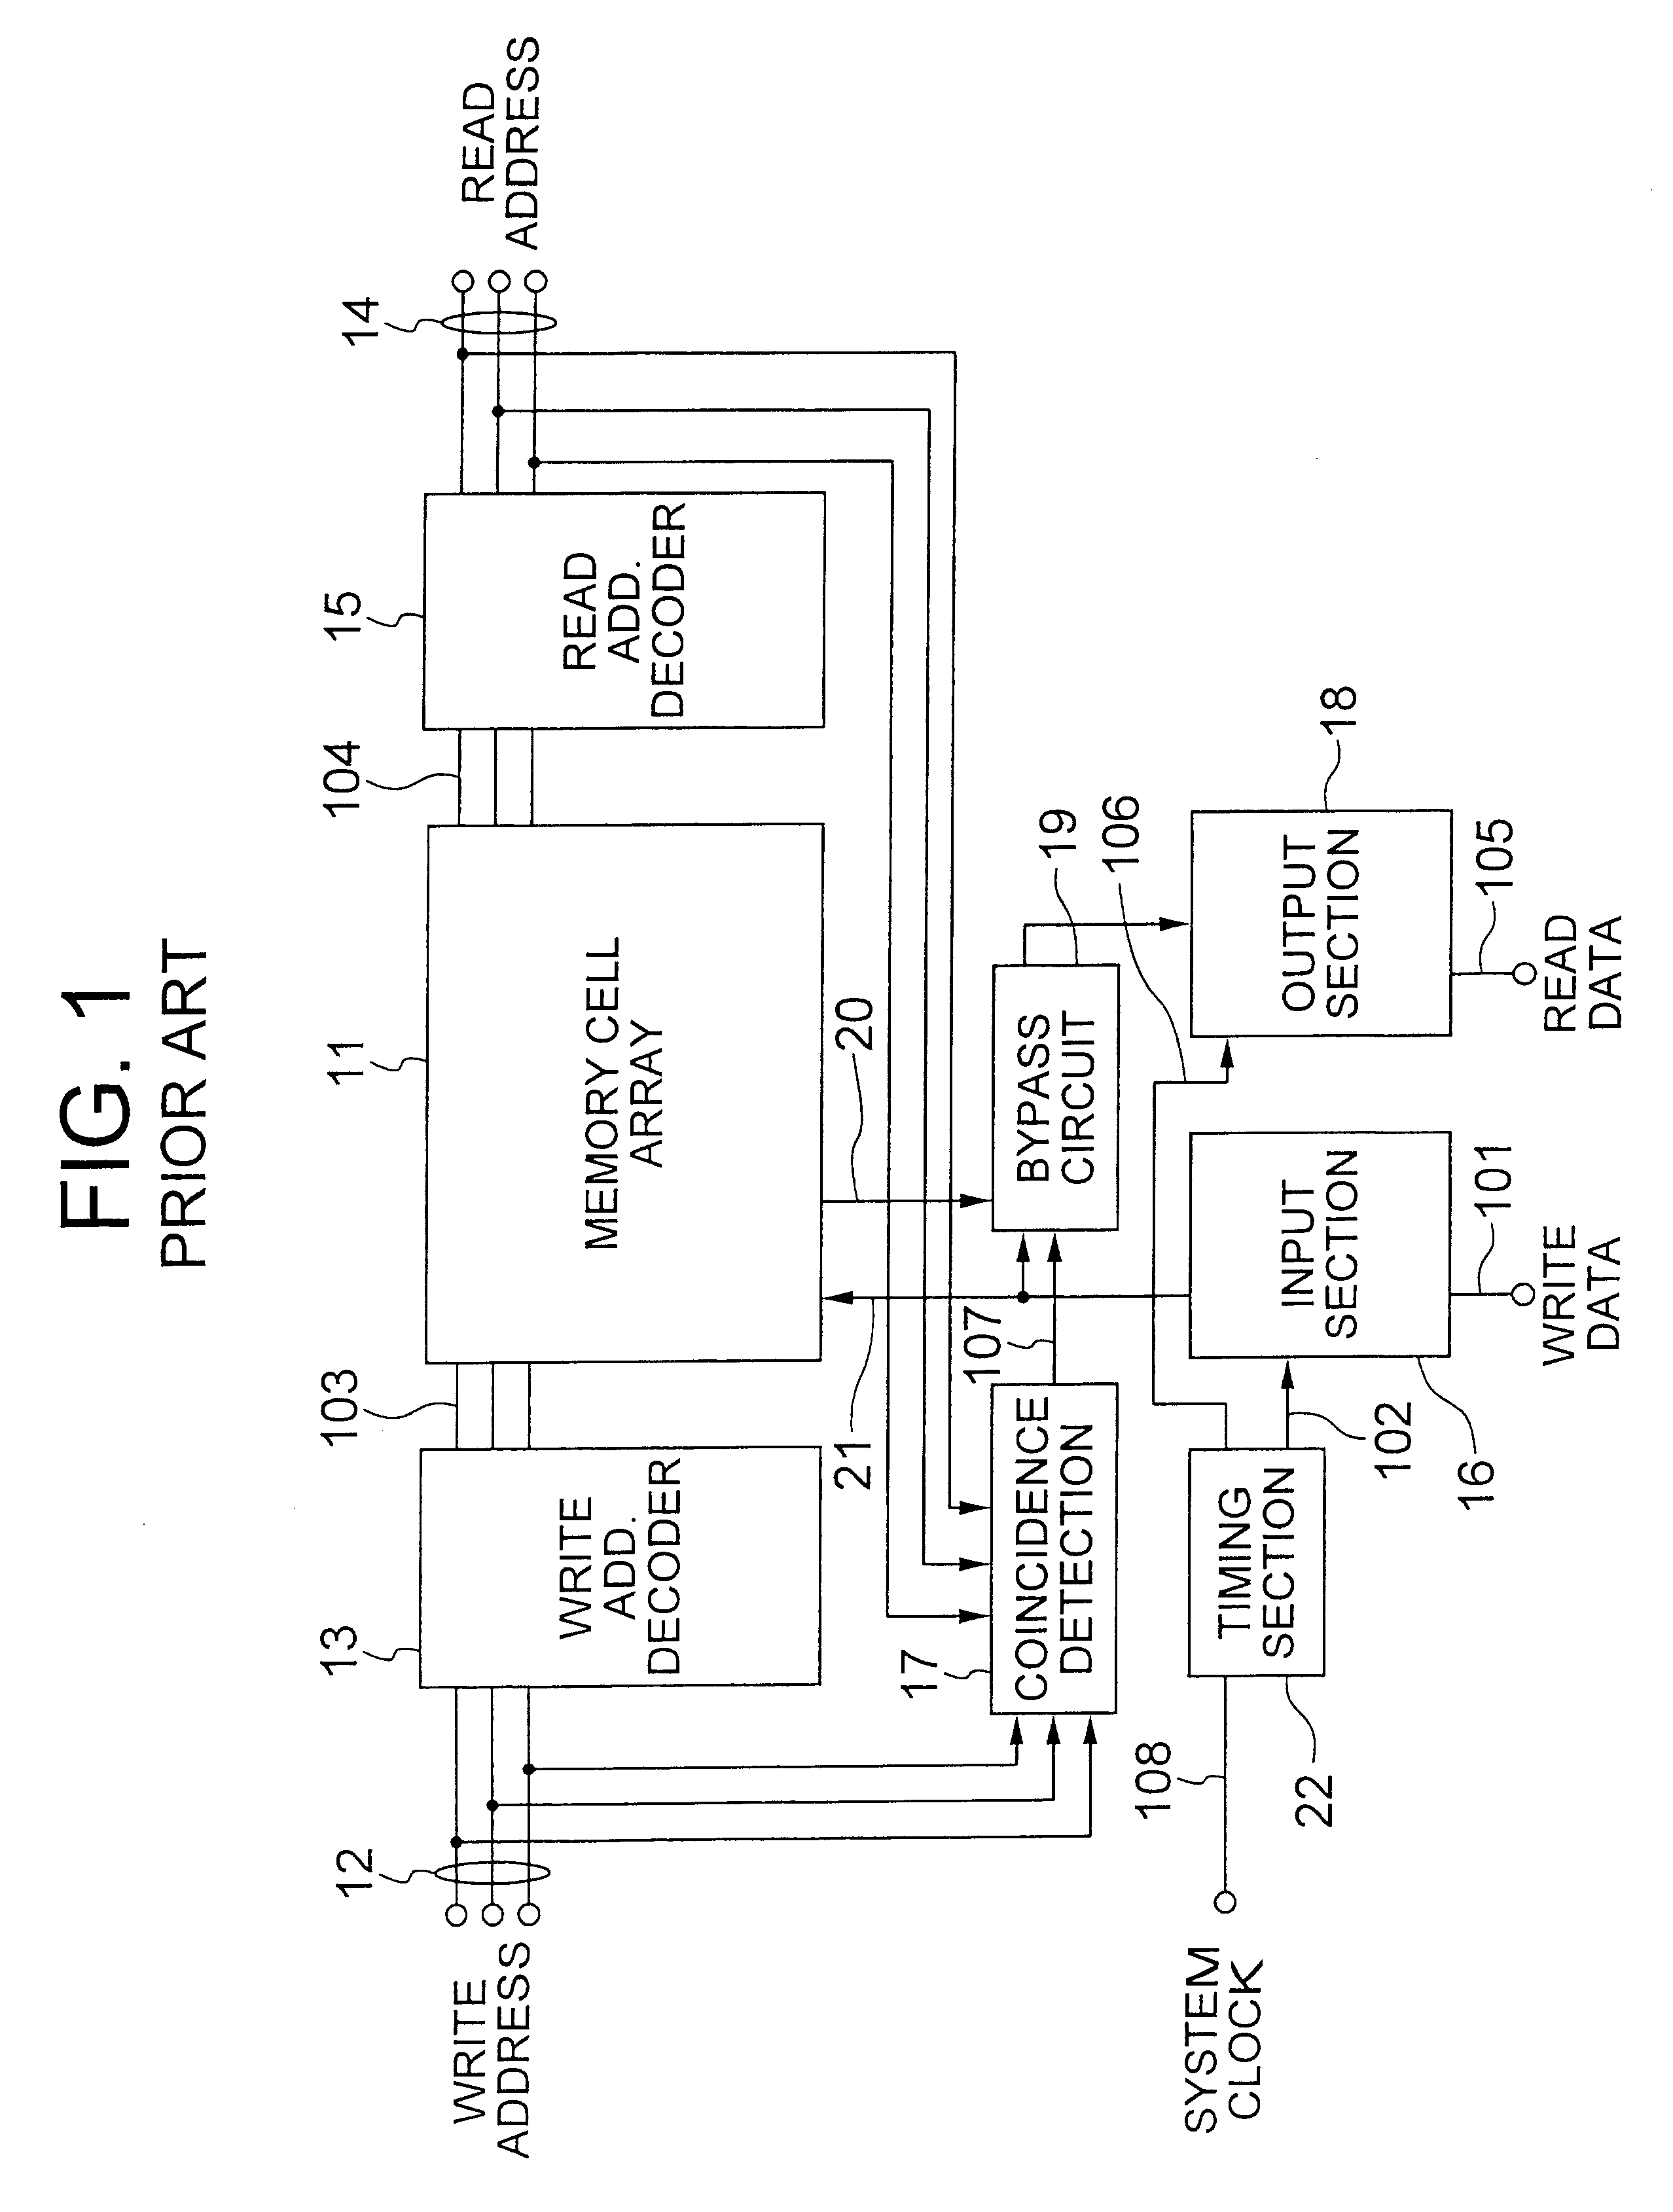 Multiple-port semiconductor memory device